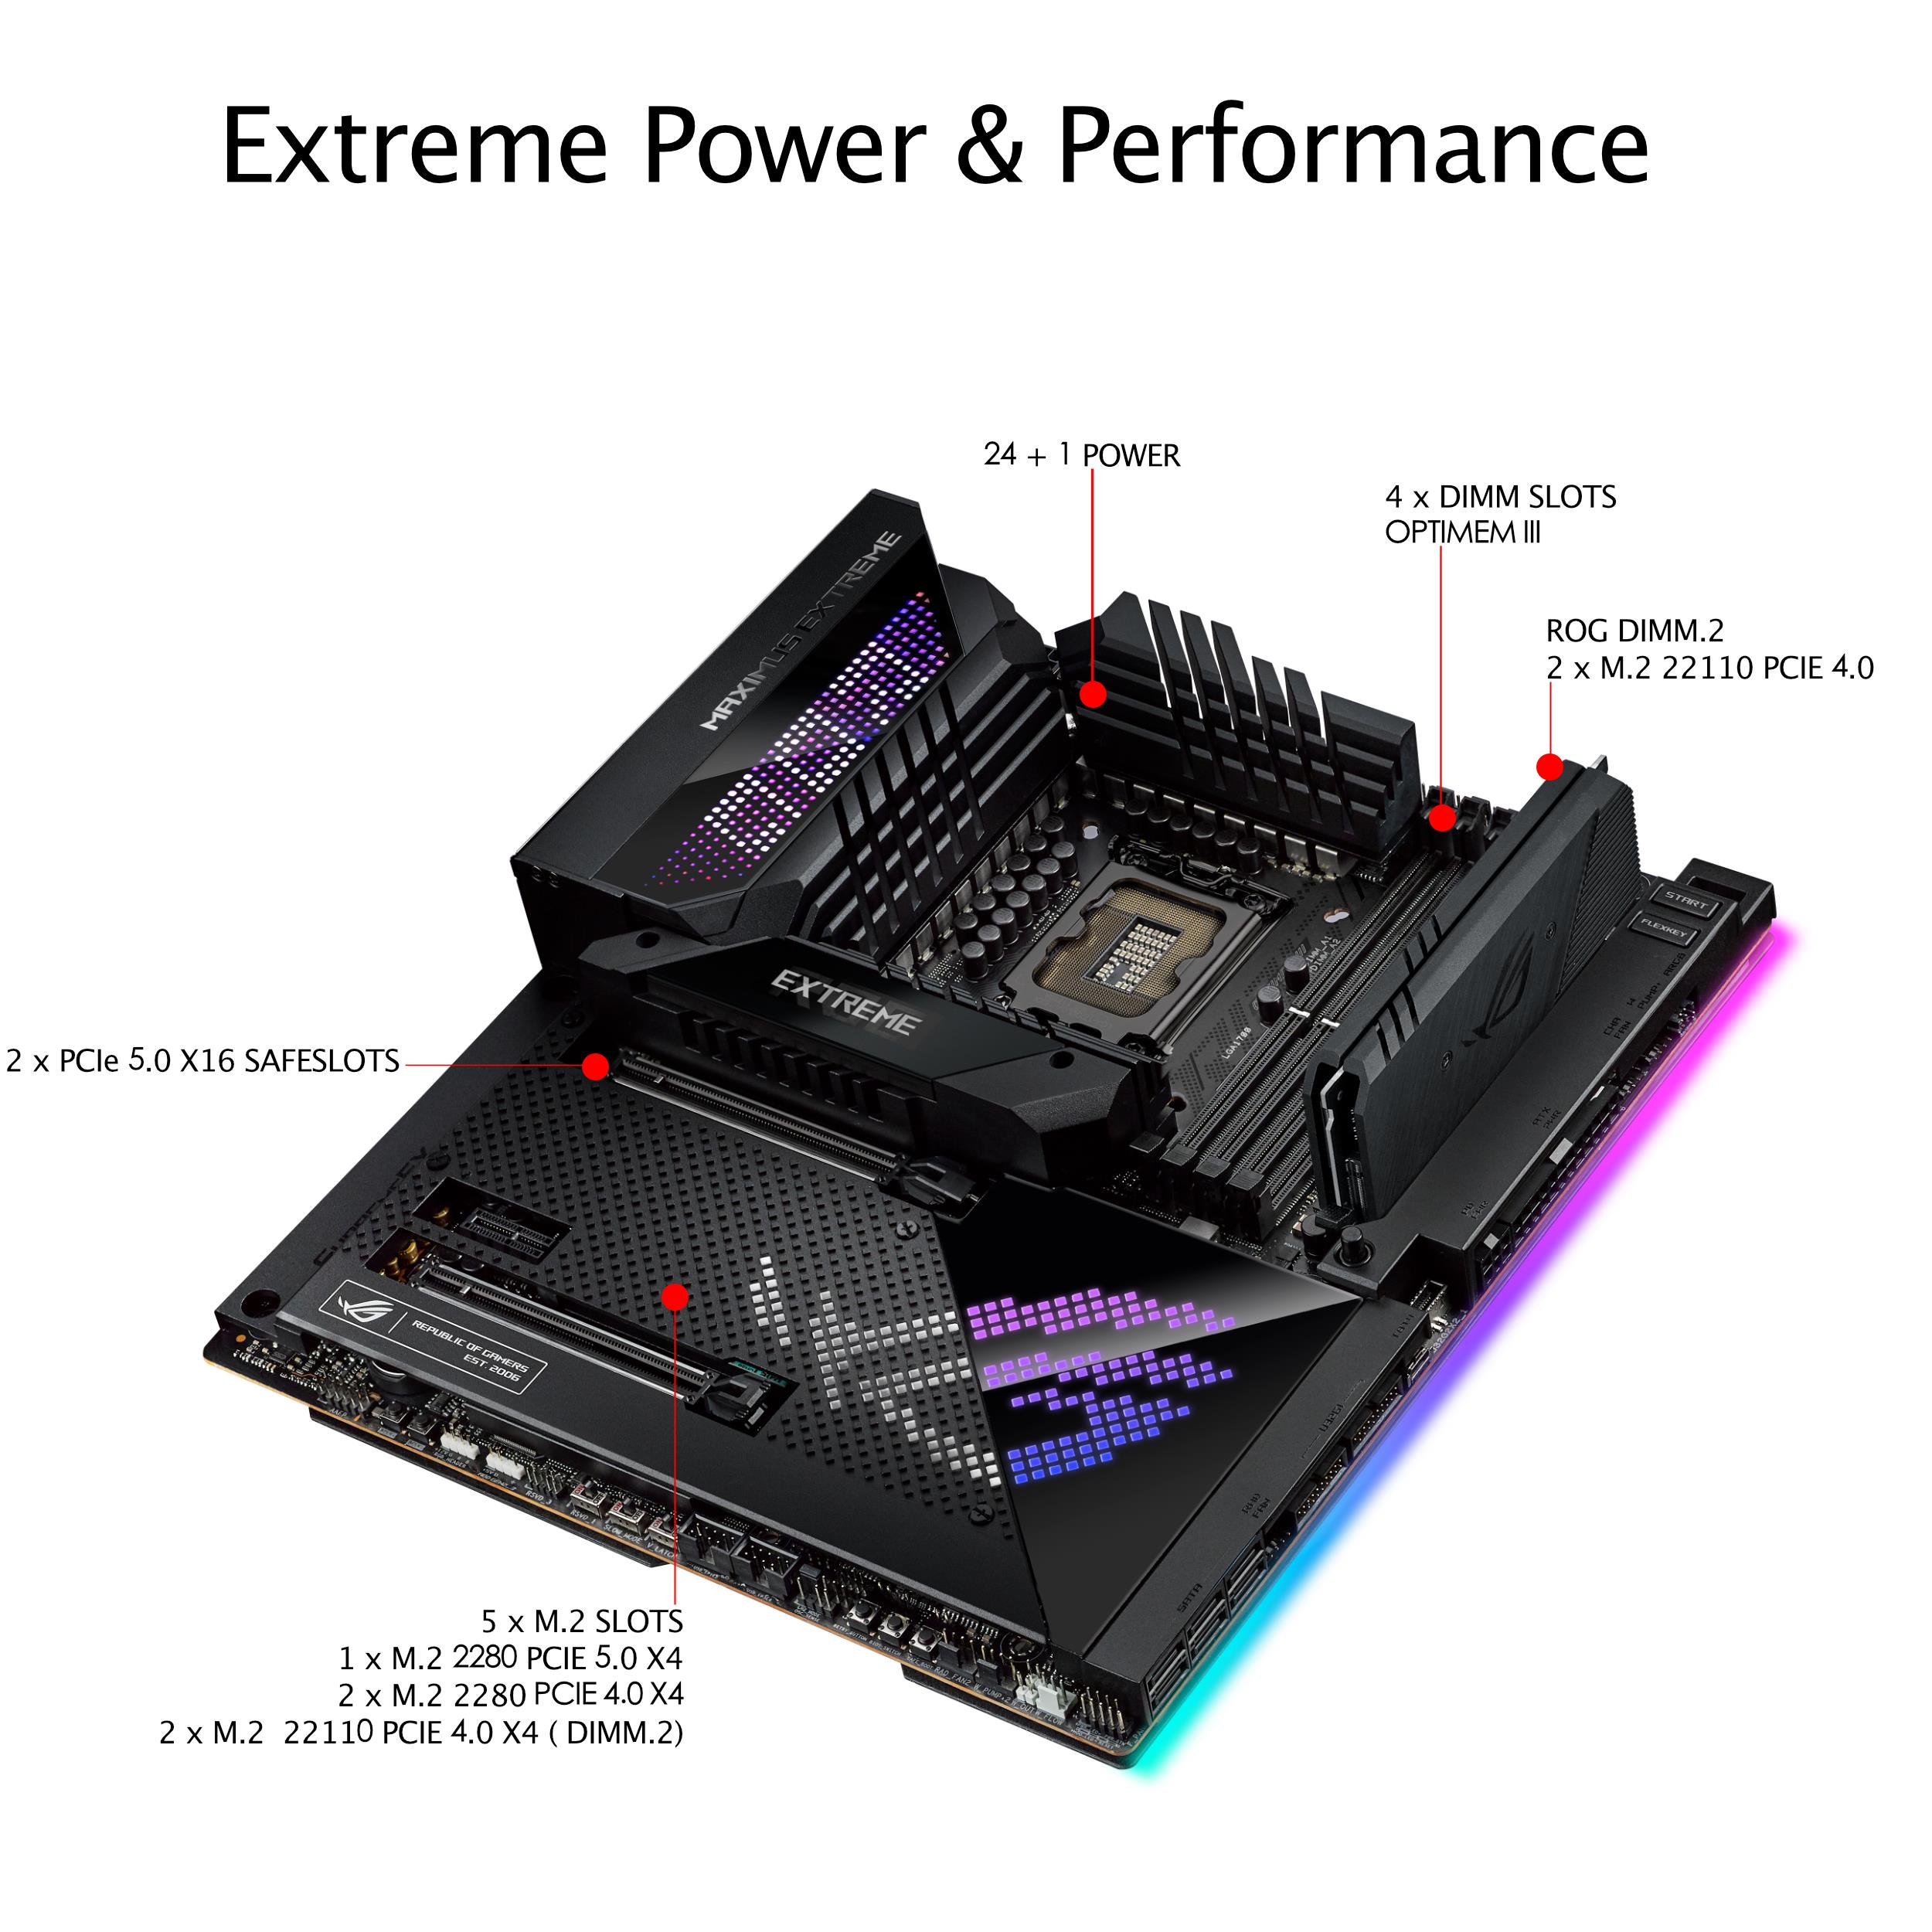 A large marketing image providing additional information about the product ASUS ROG Maximus Z690 Extreme LGA1700 eATX Desktop Motherboard - Additional alt info not provided